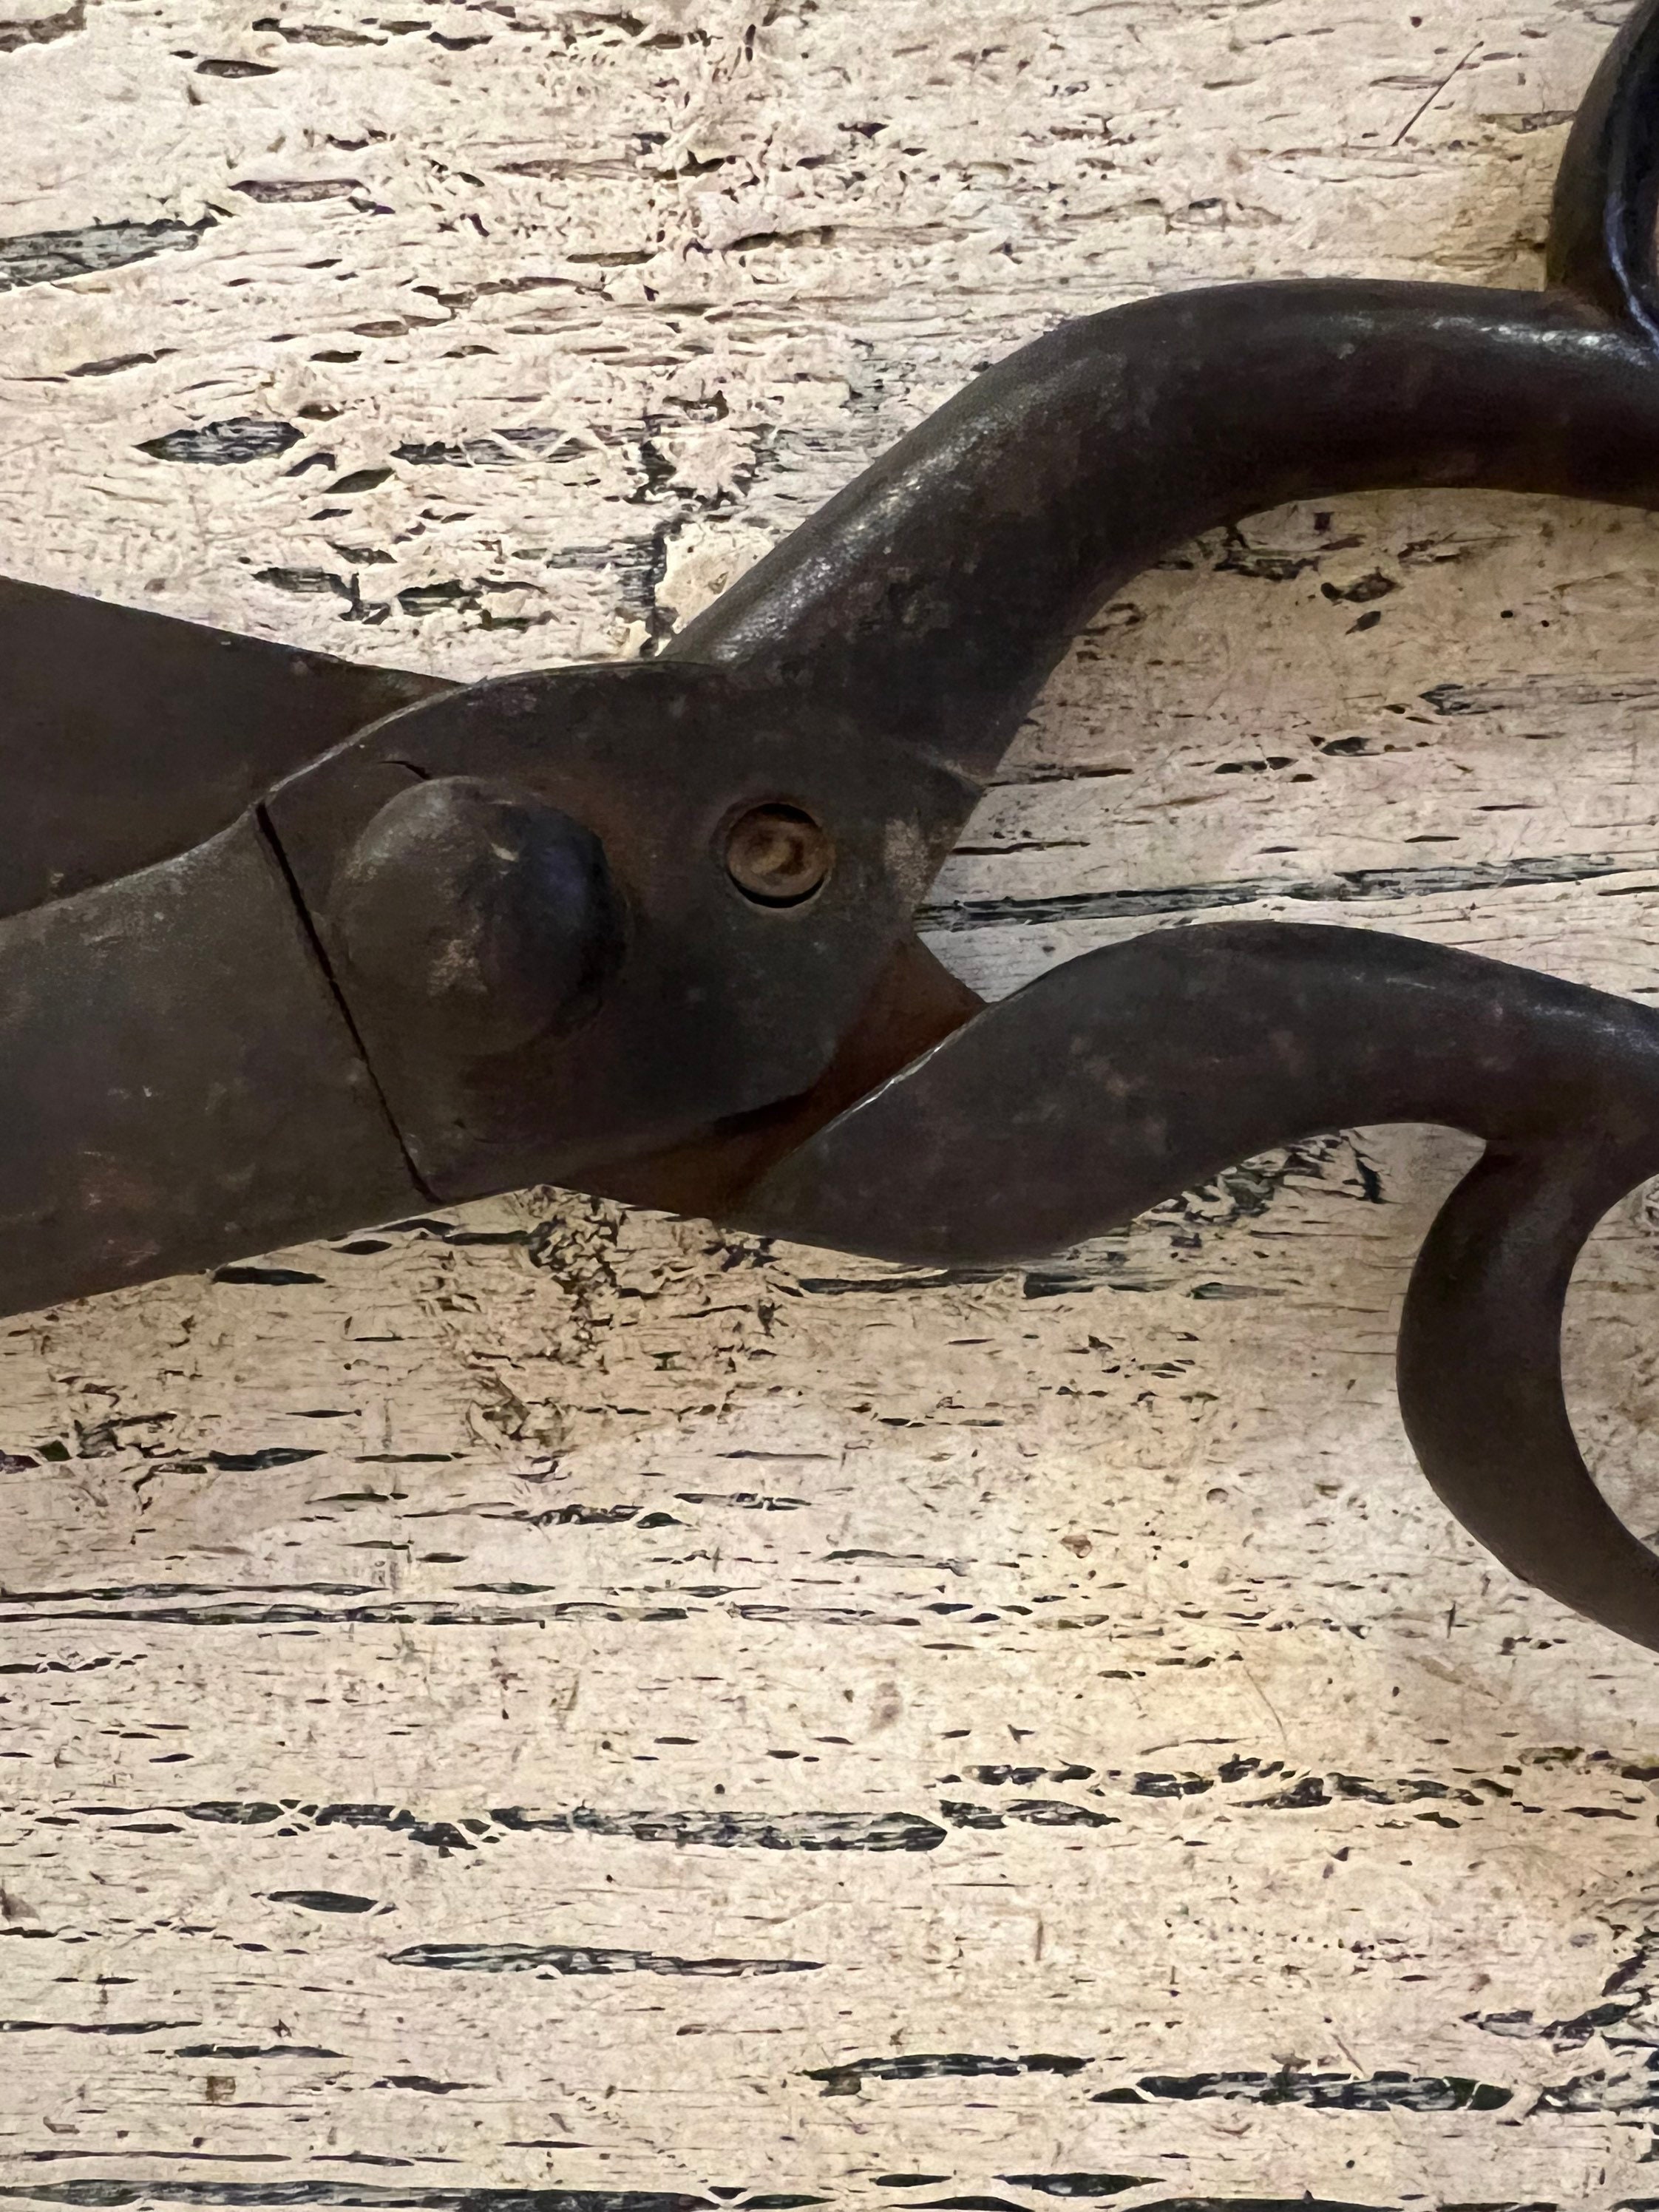 Antique, Cast Iron Shears Thick, Rustic, Industrial Scissors Rusty,  Distressed 